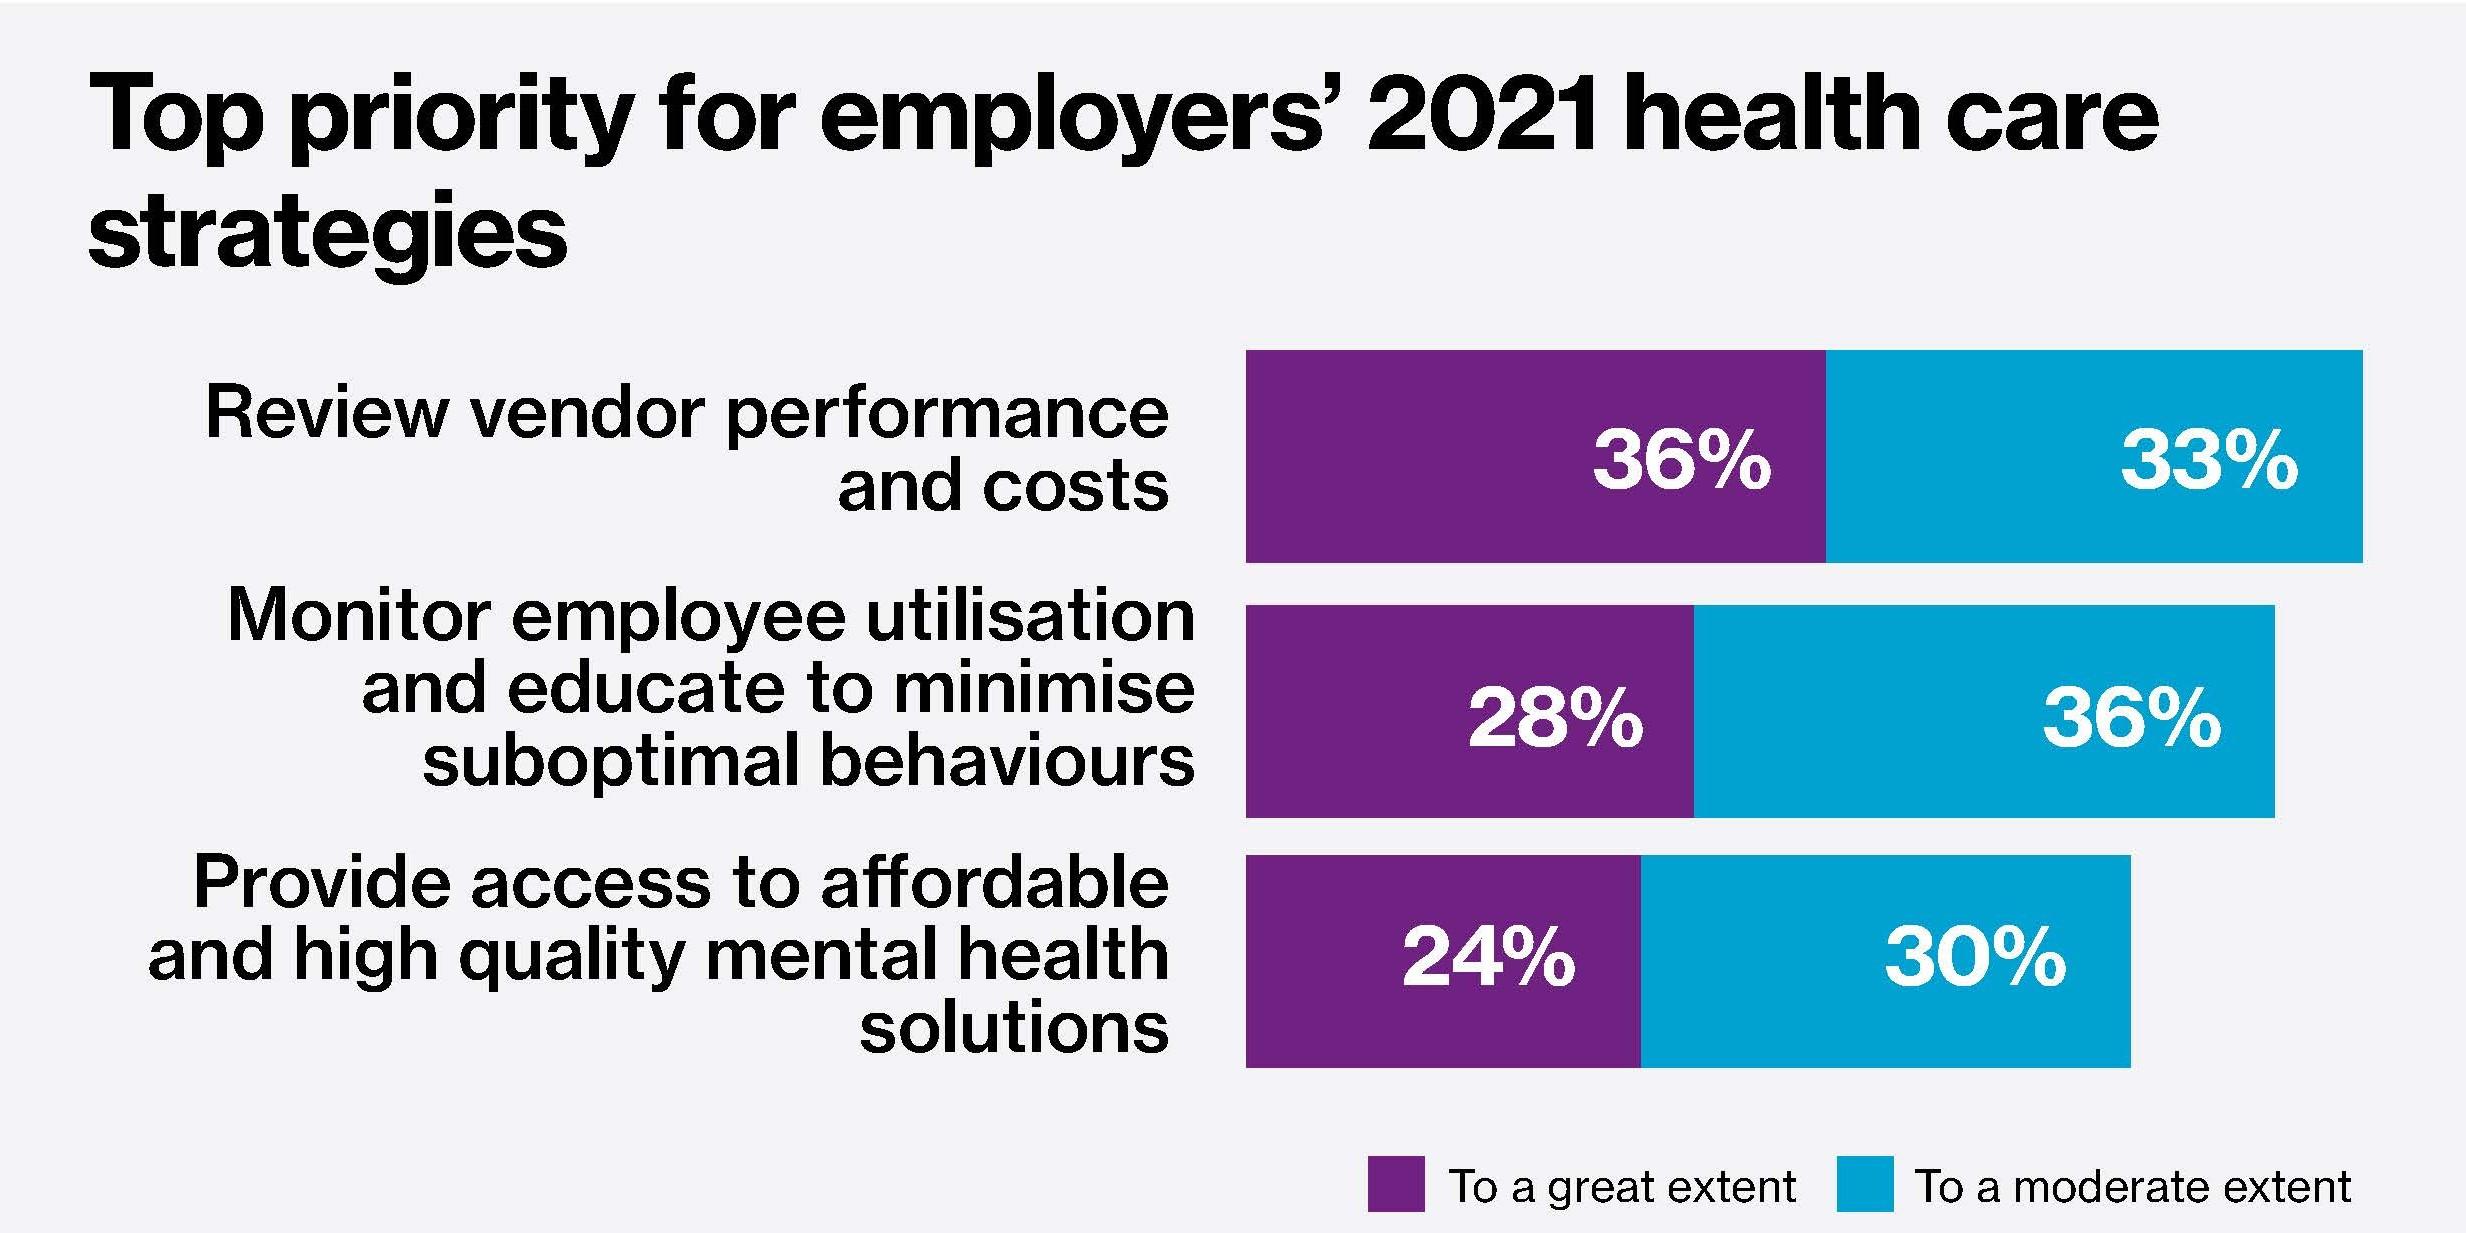 Top priority for employers' 2021 healthcare strategies.